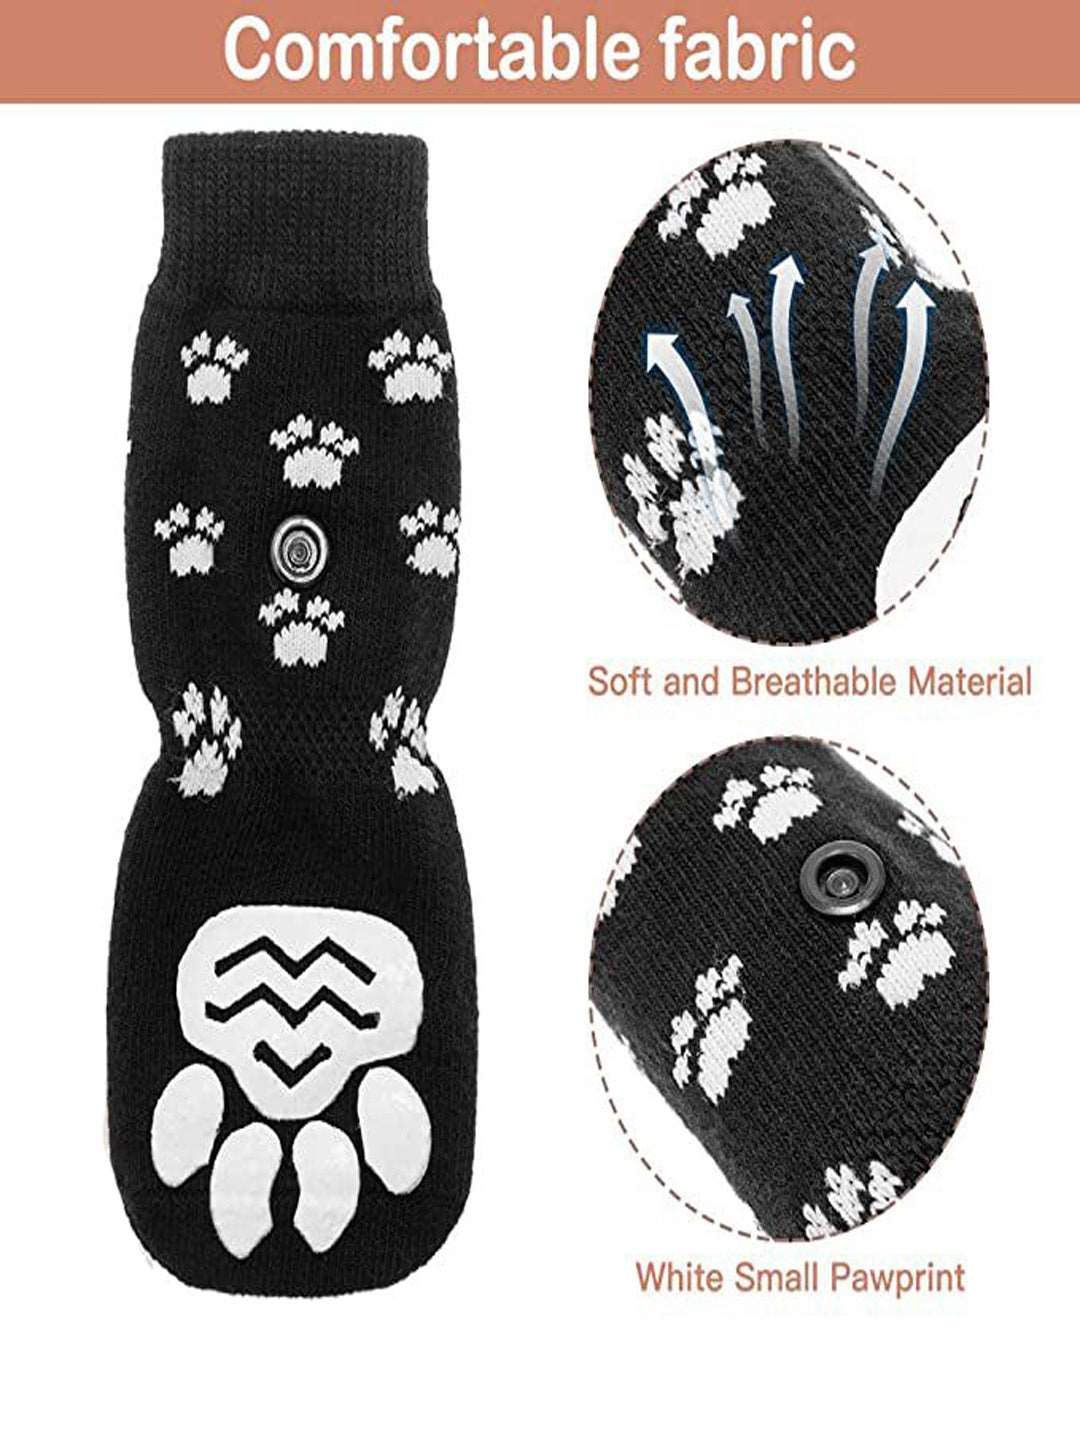  Rypet Anti Slip Dog Socks 3 Pairs - Dog Grip Socks with Straps  Traction Control for Indoor on Hardwood Floor Wear, Pet Paw Protector for  Small Medium Large Dogs M 